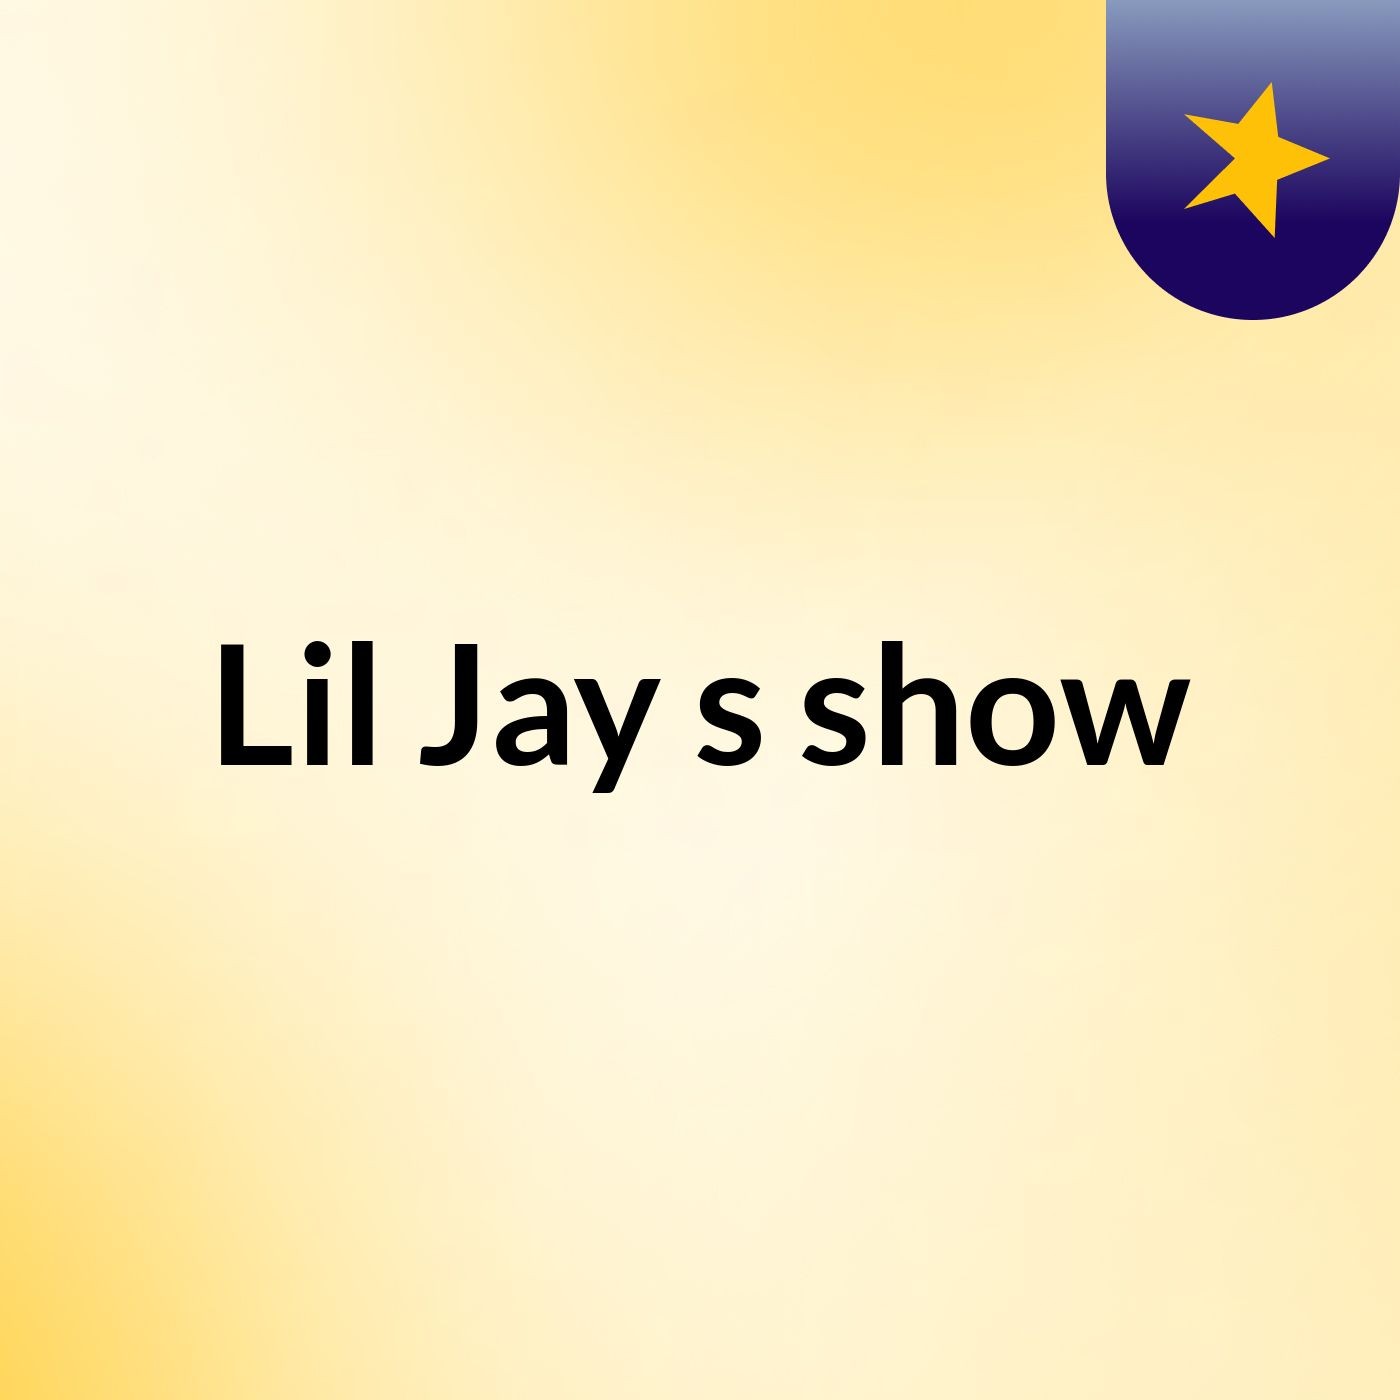 Lil Jay's show